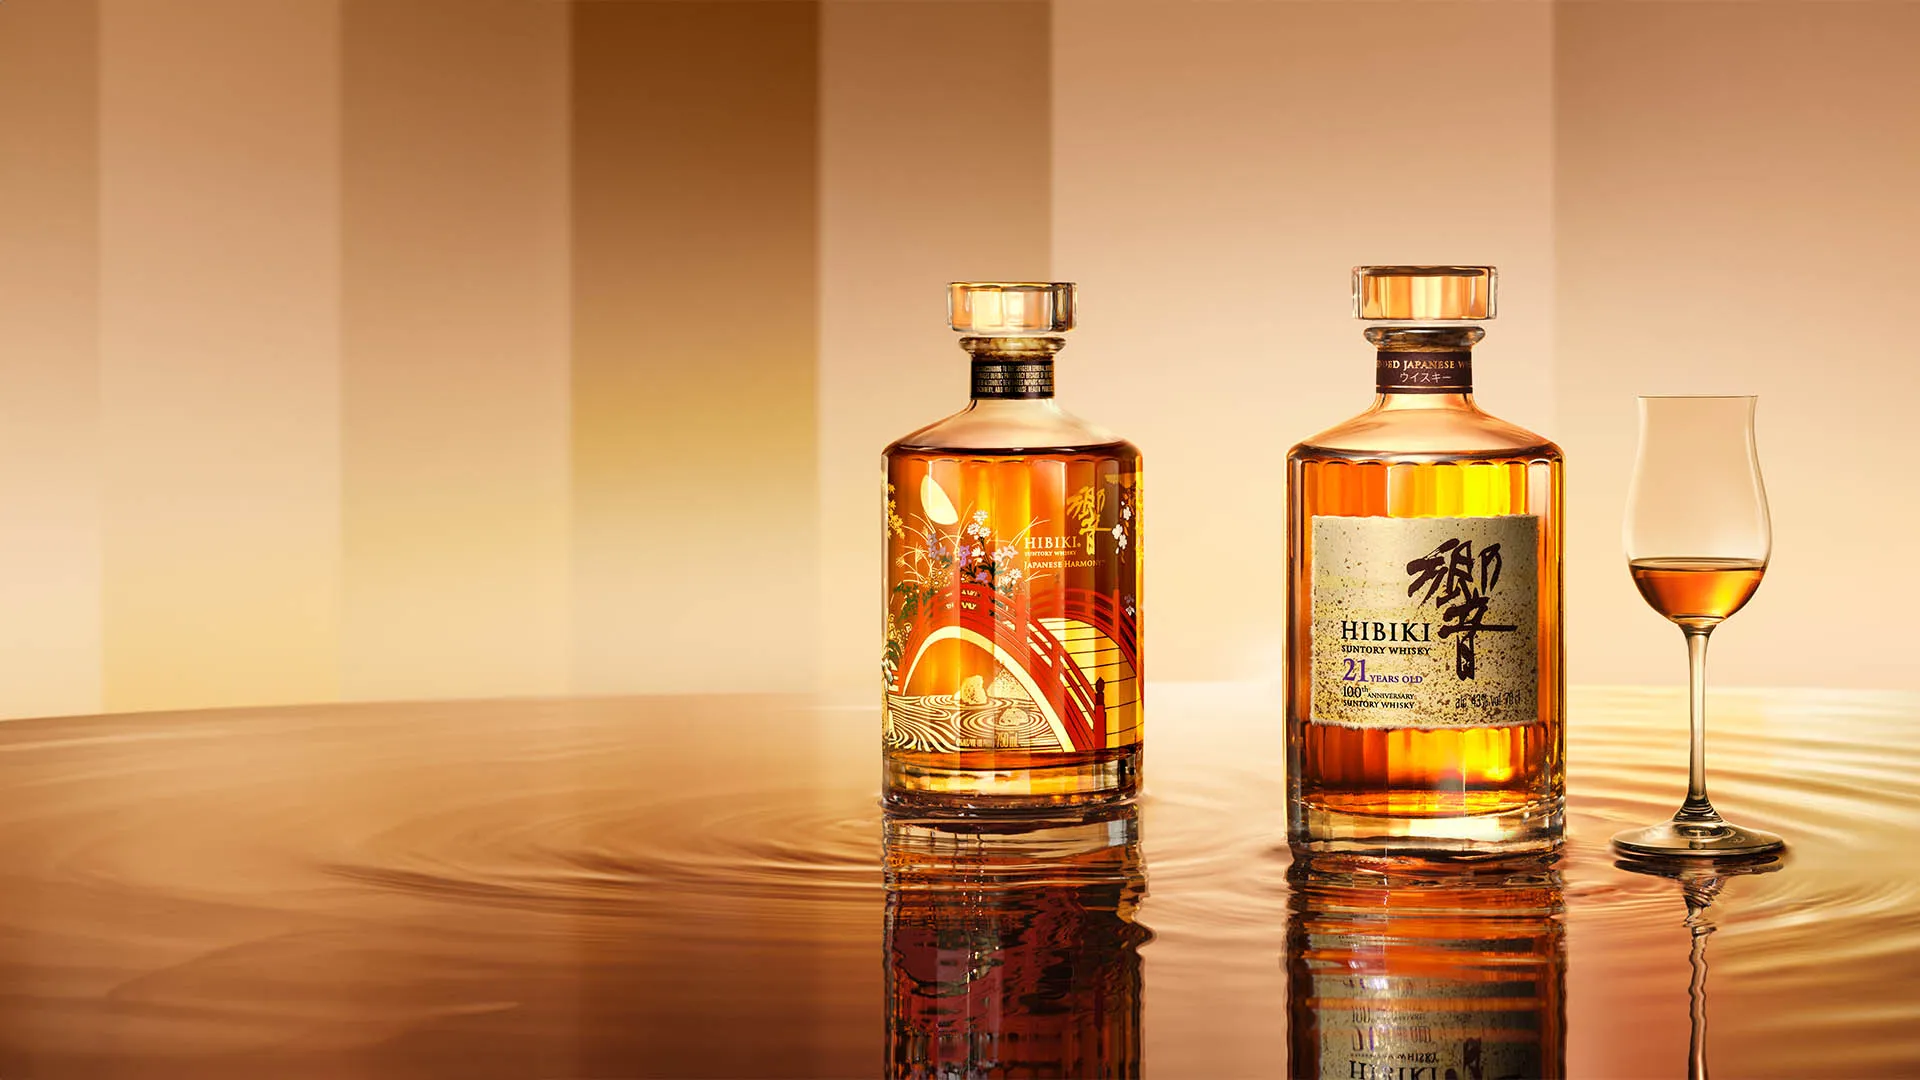 the house of suntory launches limited edition hibiki 21 year old whisky and hibiki japanese harmony bottle design in honor of centennial anniversary